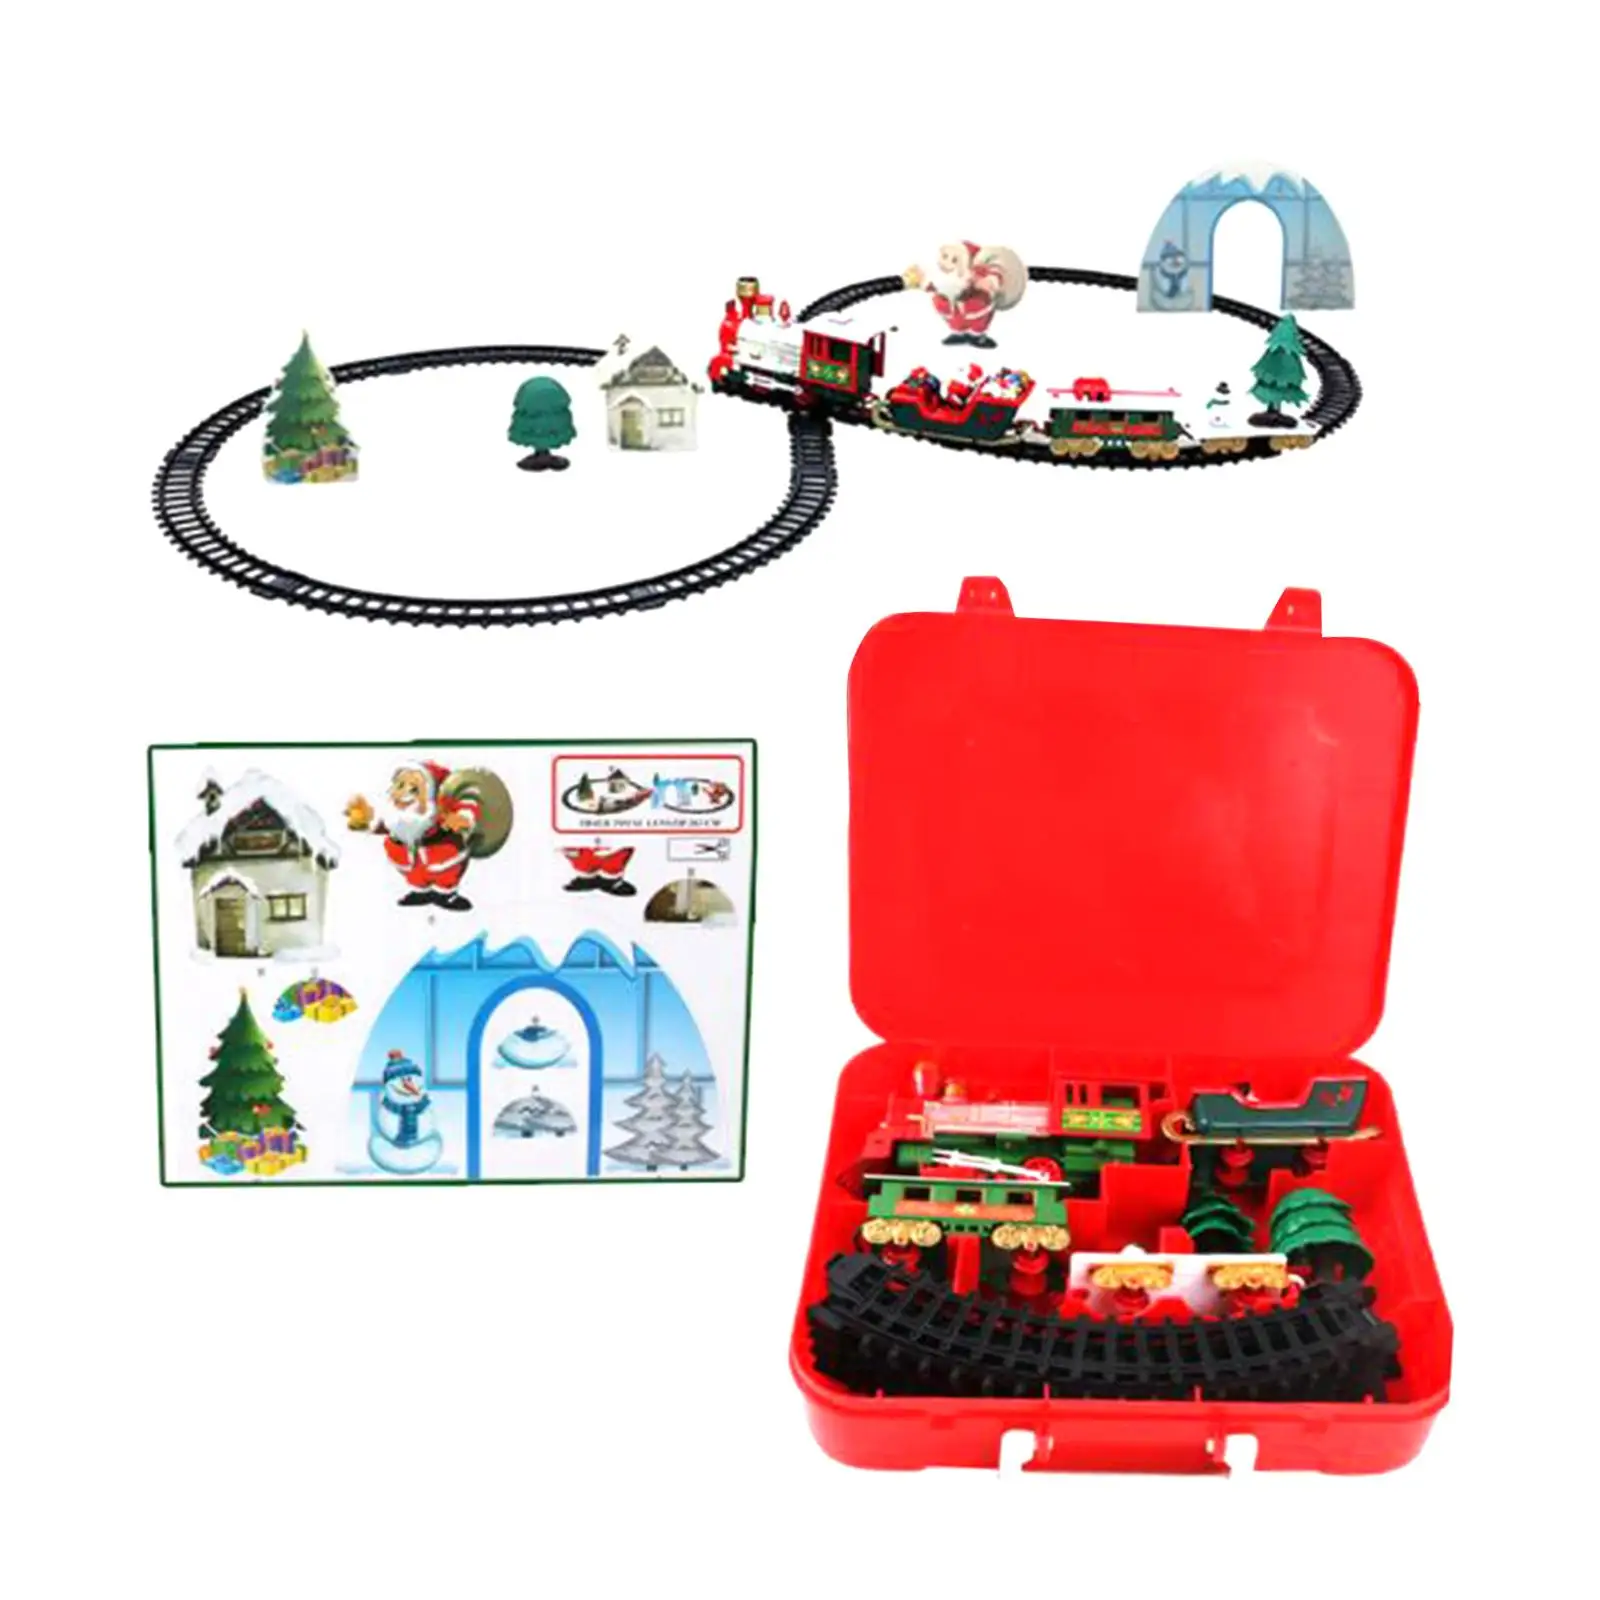 Train Set Battery Operated Electric Train Toys Locomotive Engine Tracks Easy Assemble with Lights Sound for kids Gift